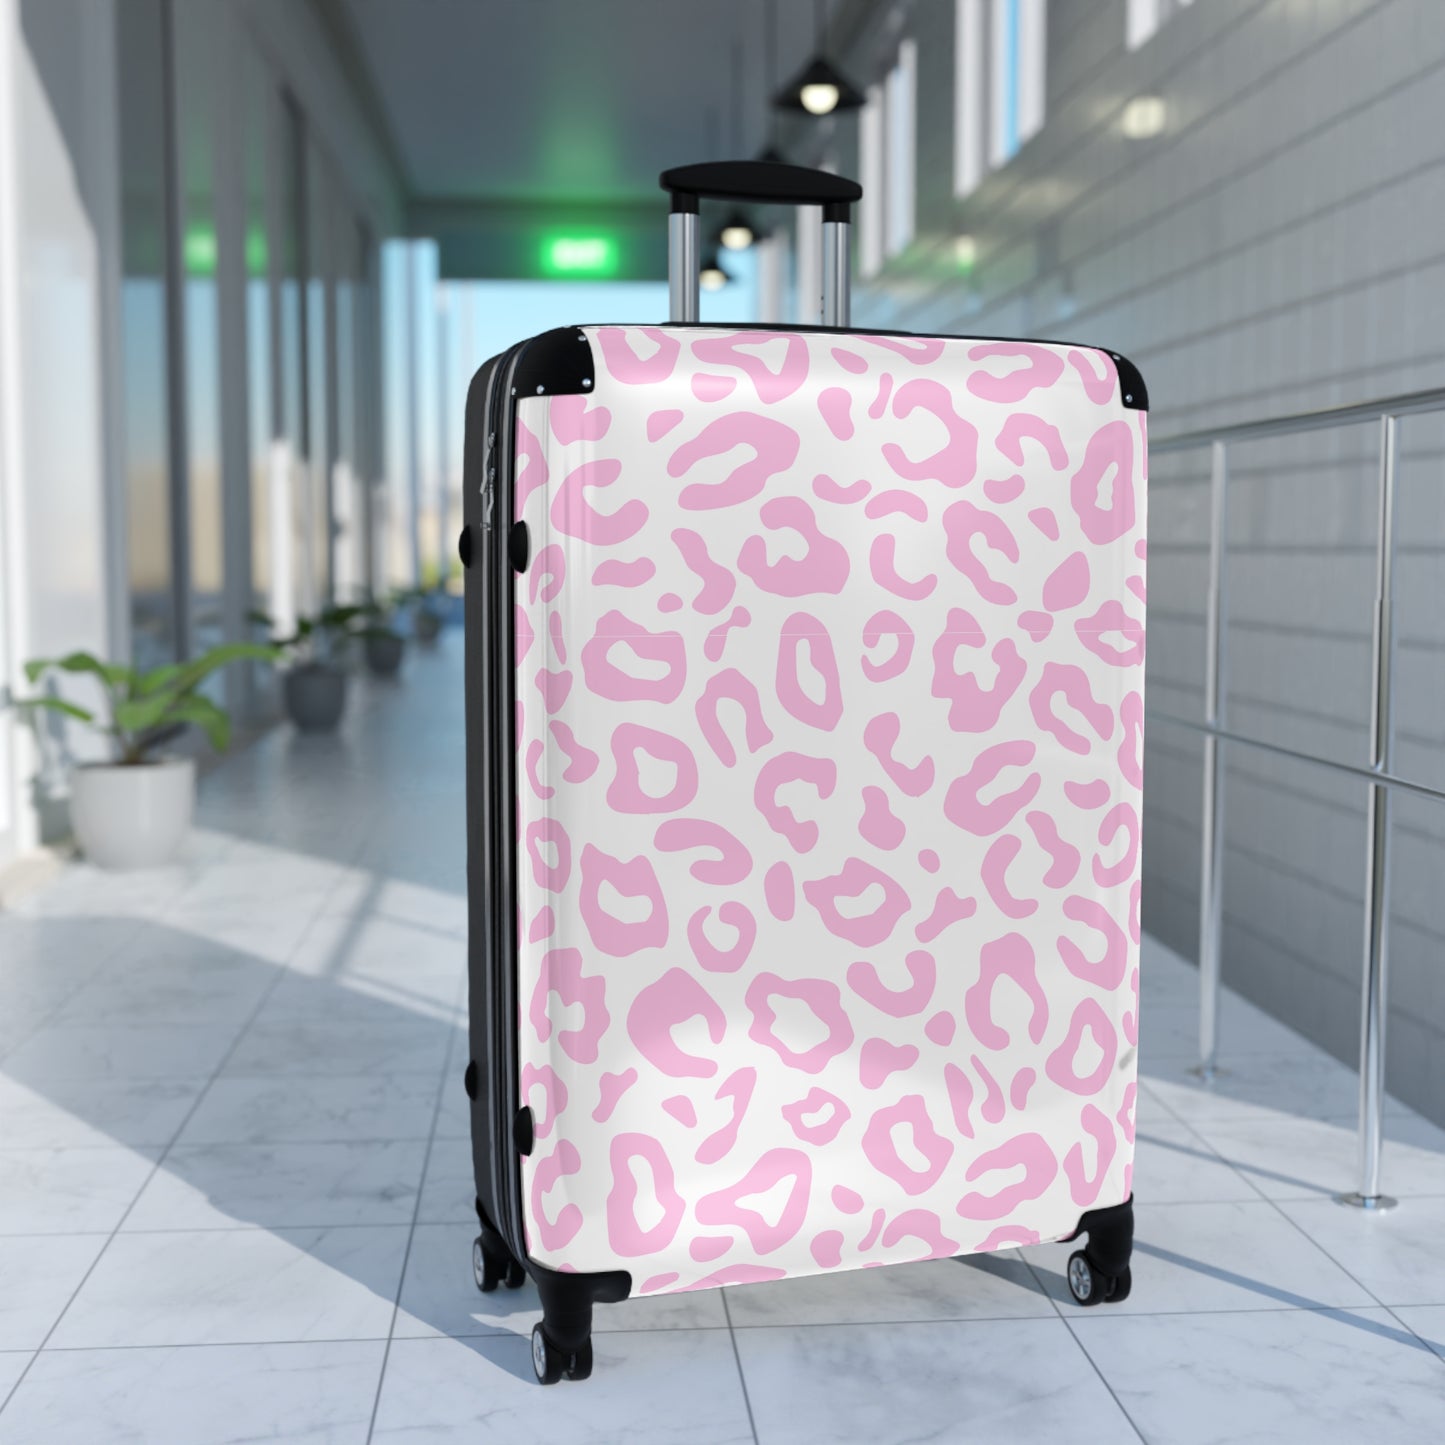 Pink Suitcase / Leopard Print Luggage / Pink Leopard Print / Gift for Her / Gift for Traveler